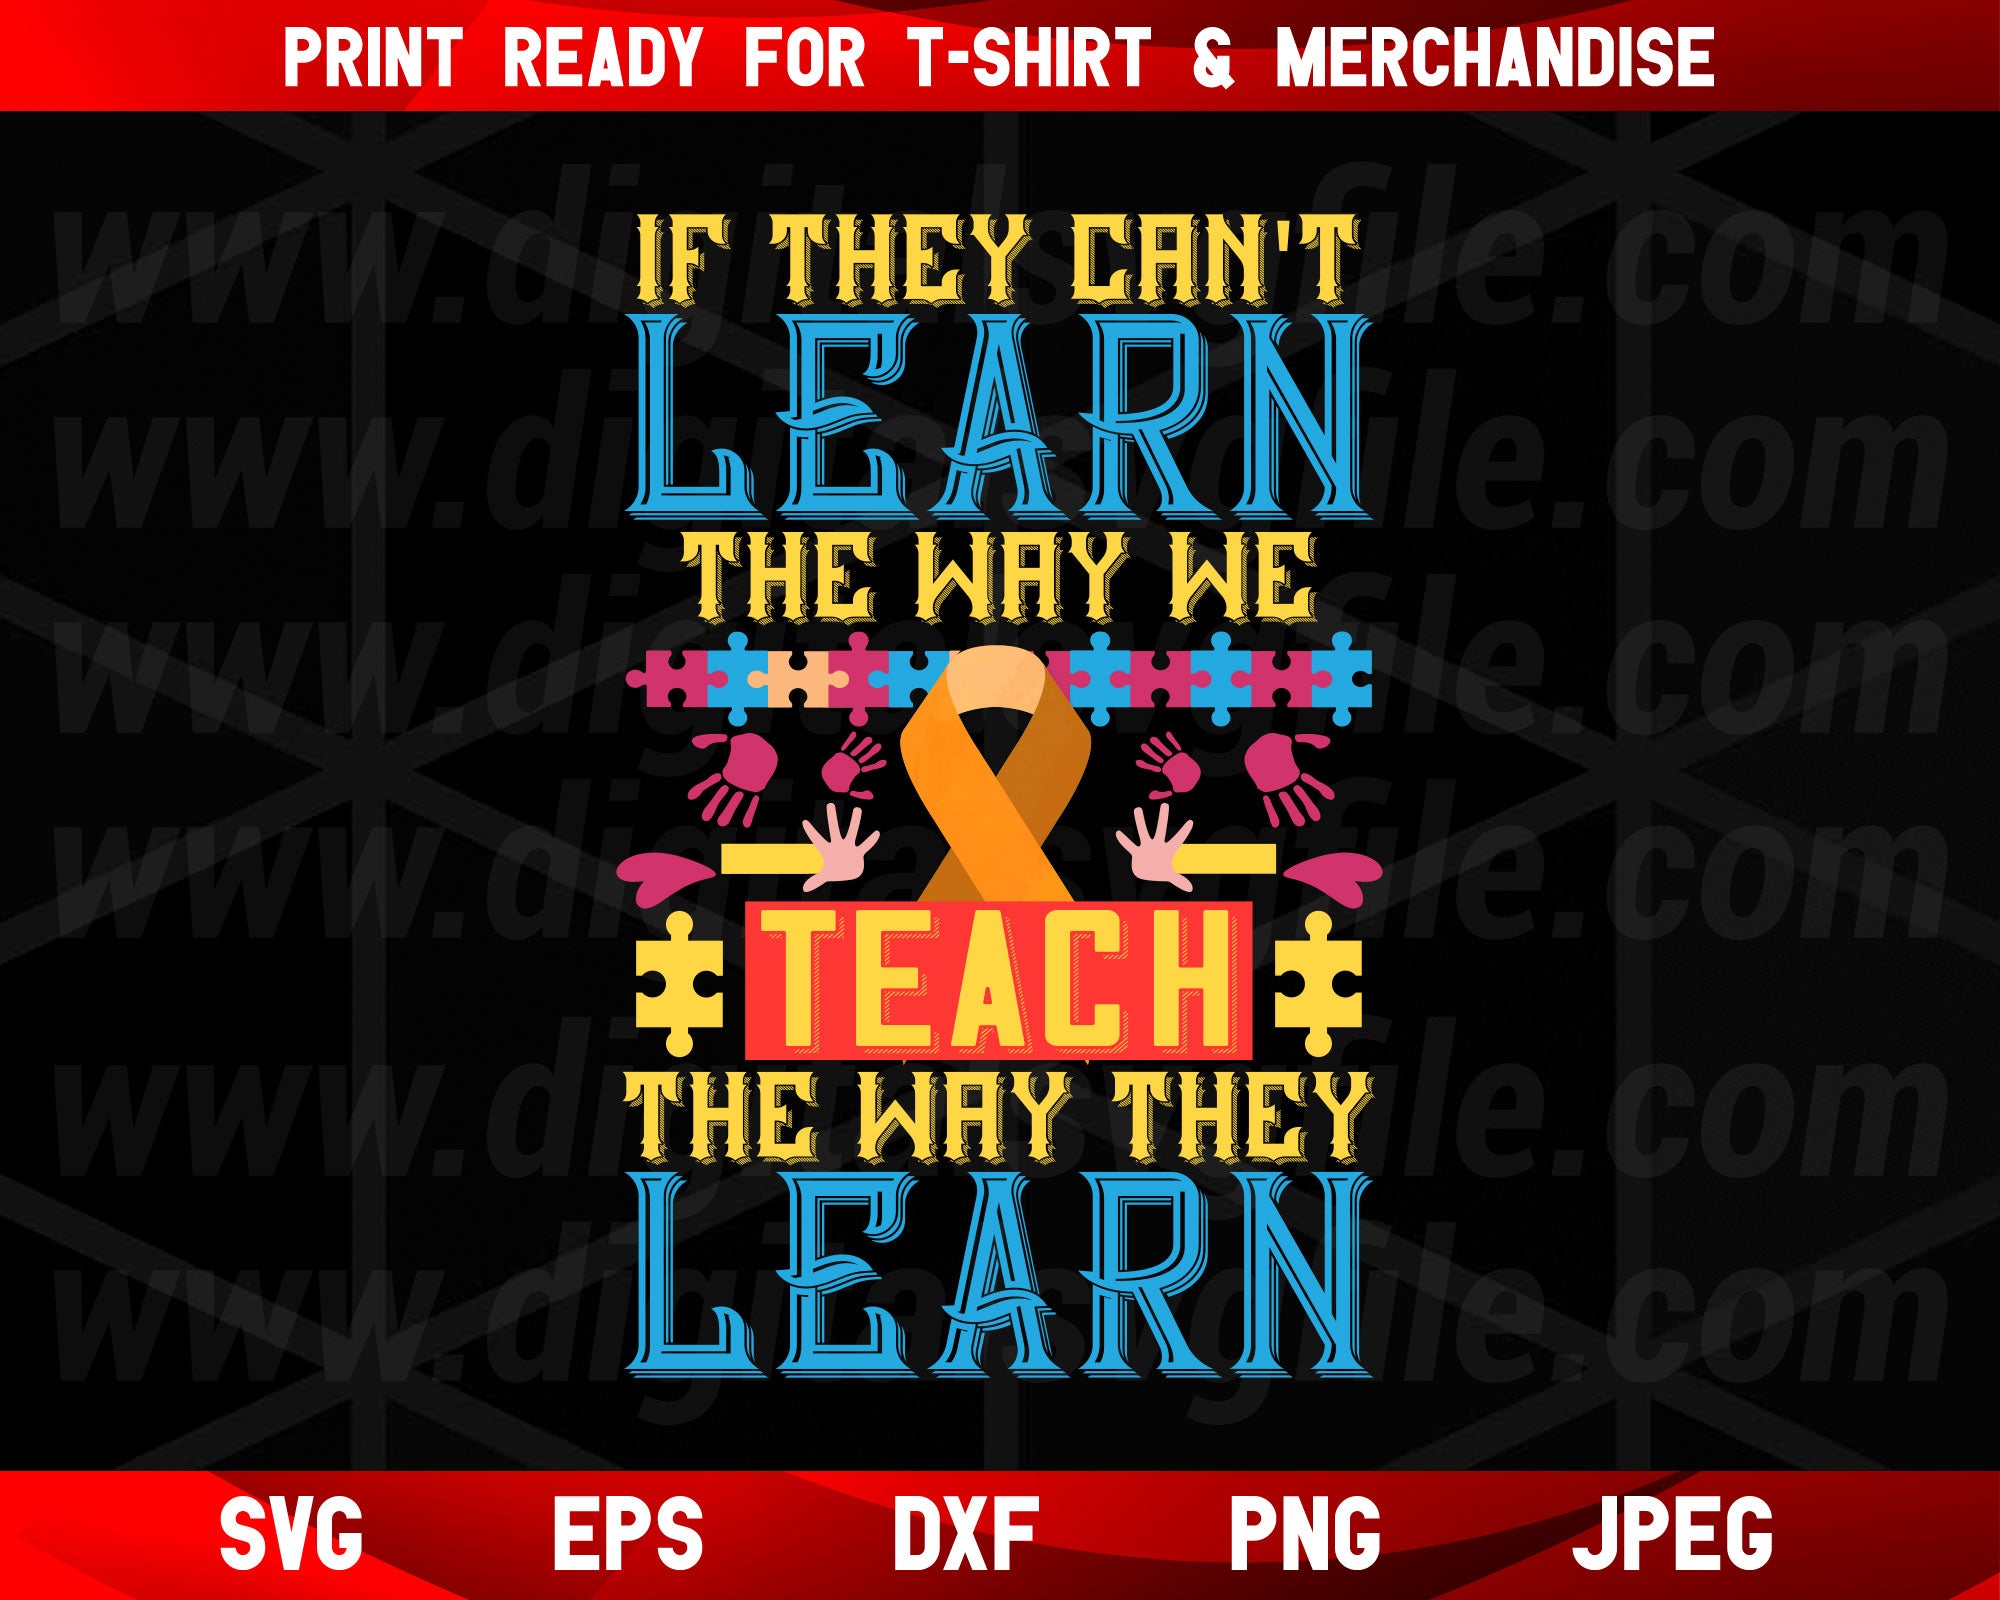 Download The Way They Learn Autism Svg T Shirt Design In Eps Png Dxf Files Digital Svg File